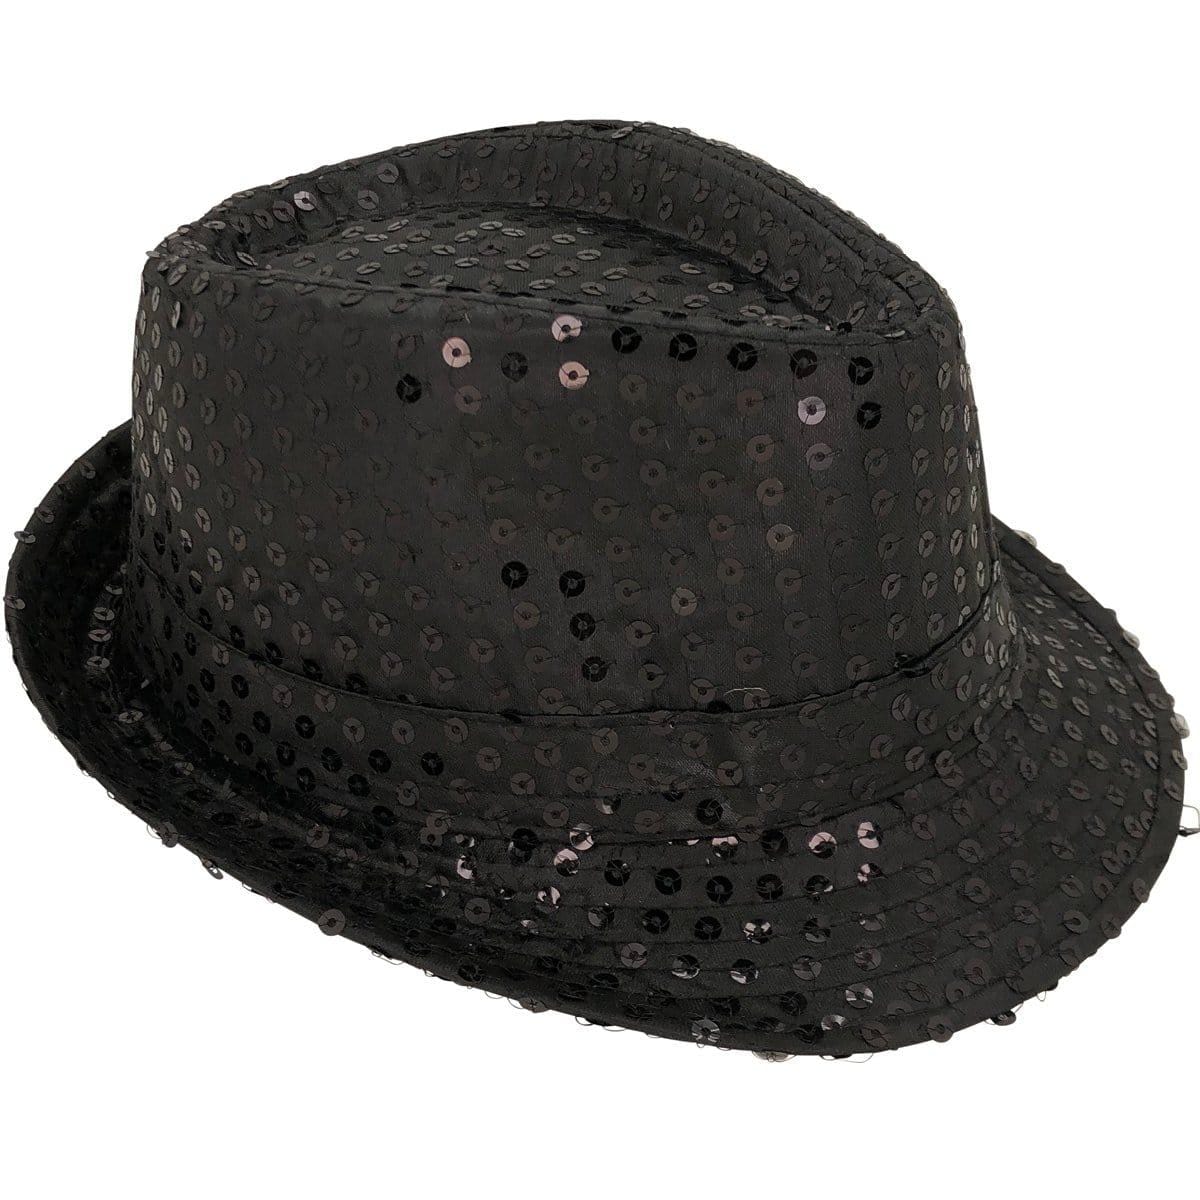 Buy Costume Accessories Black sequin fedora hat for kids sold at Party Expert